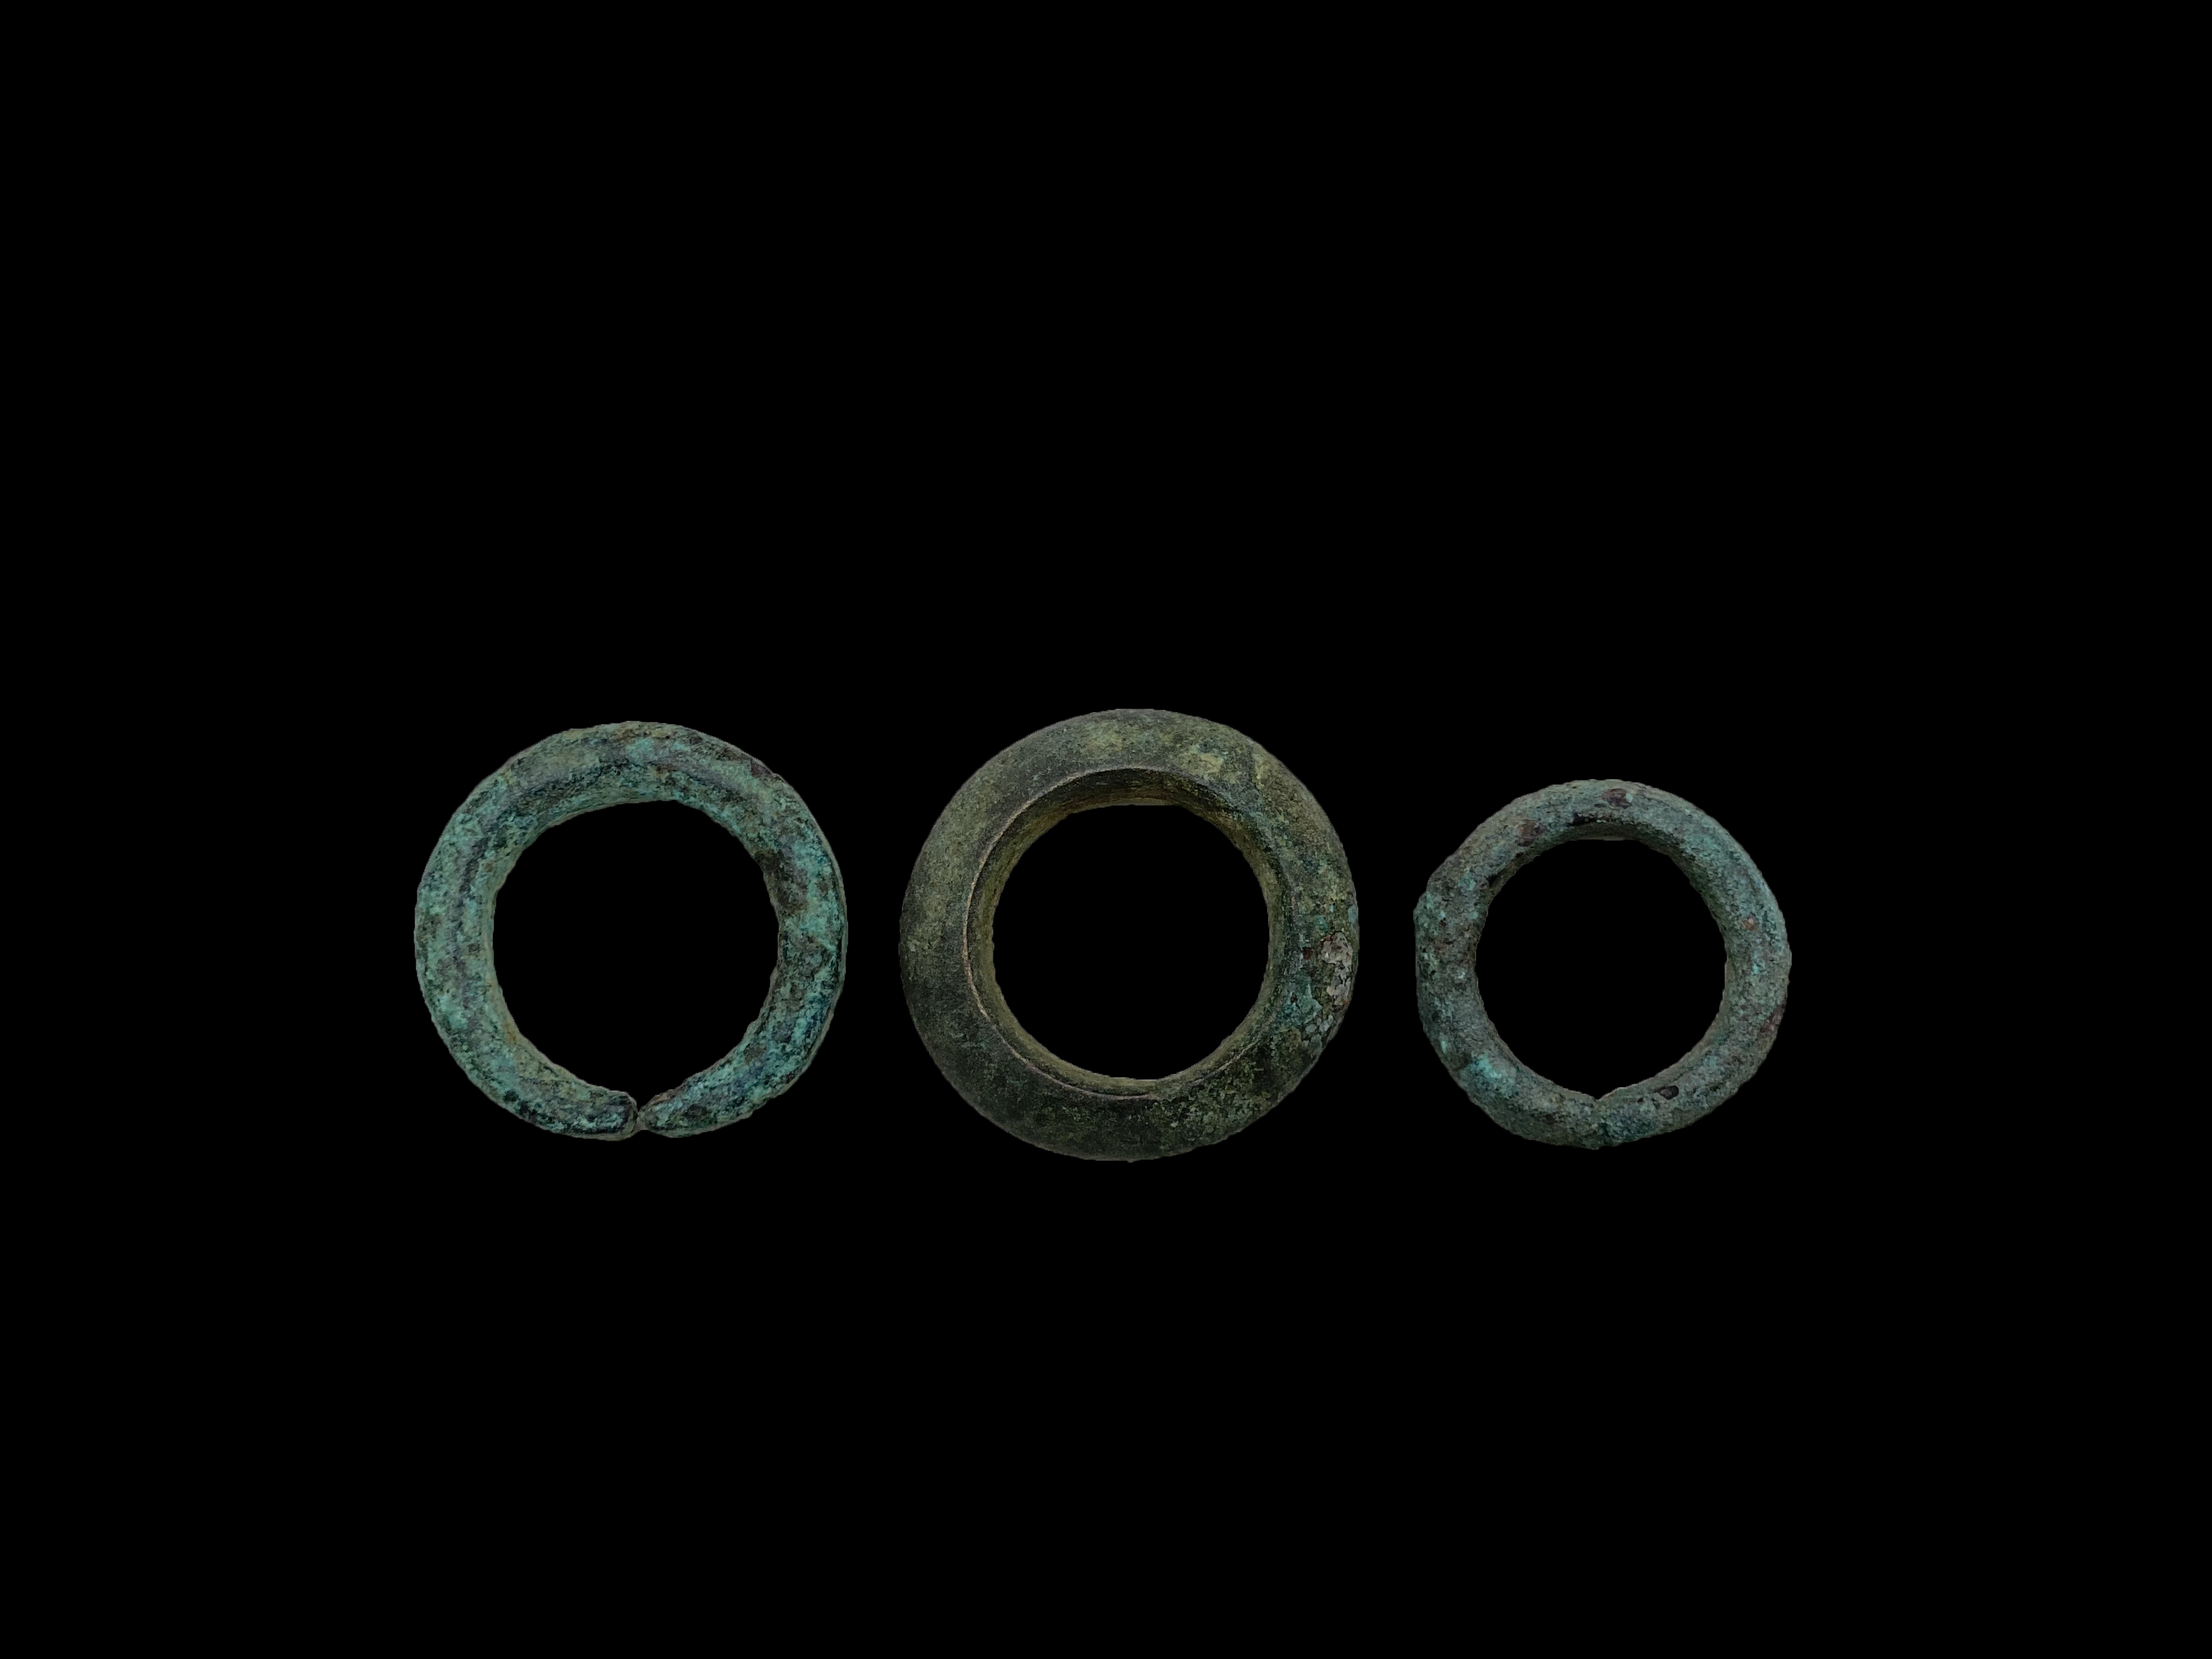 Set of 3 Excavated Ancient Bronze Rings - from Djenne, Mali